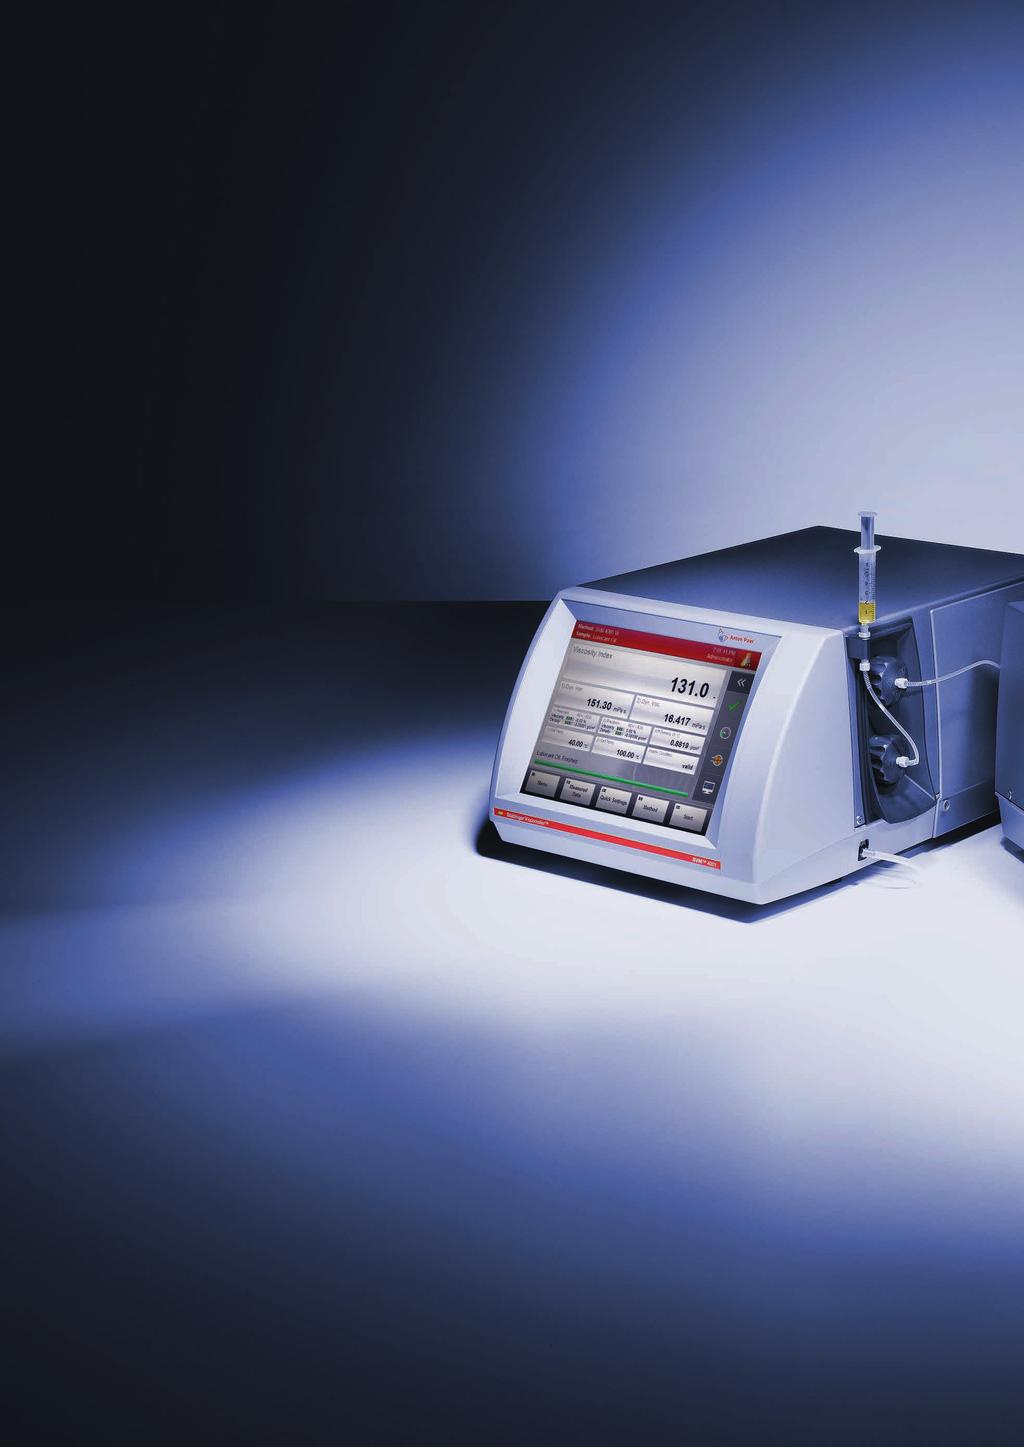 These features make the difference There is an SVM viscometer for every application: ranging from measuring lubricating oils, used oils, crude oils, heavy fuels, distillate fuels to vegetable oils